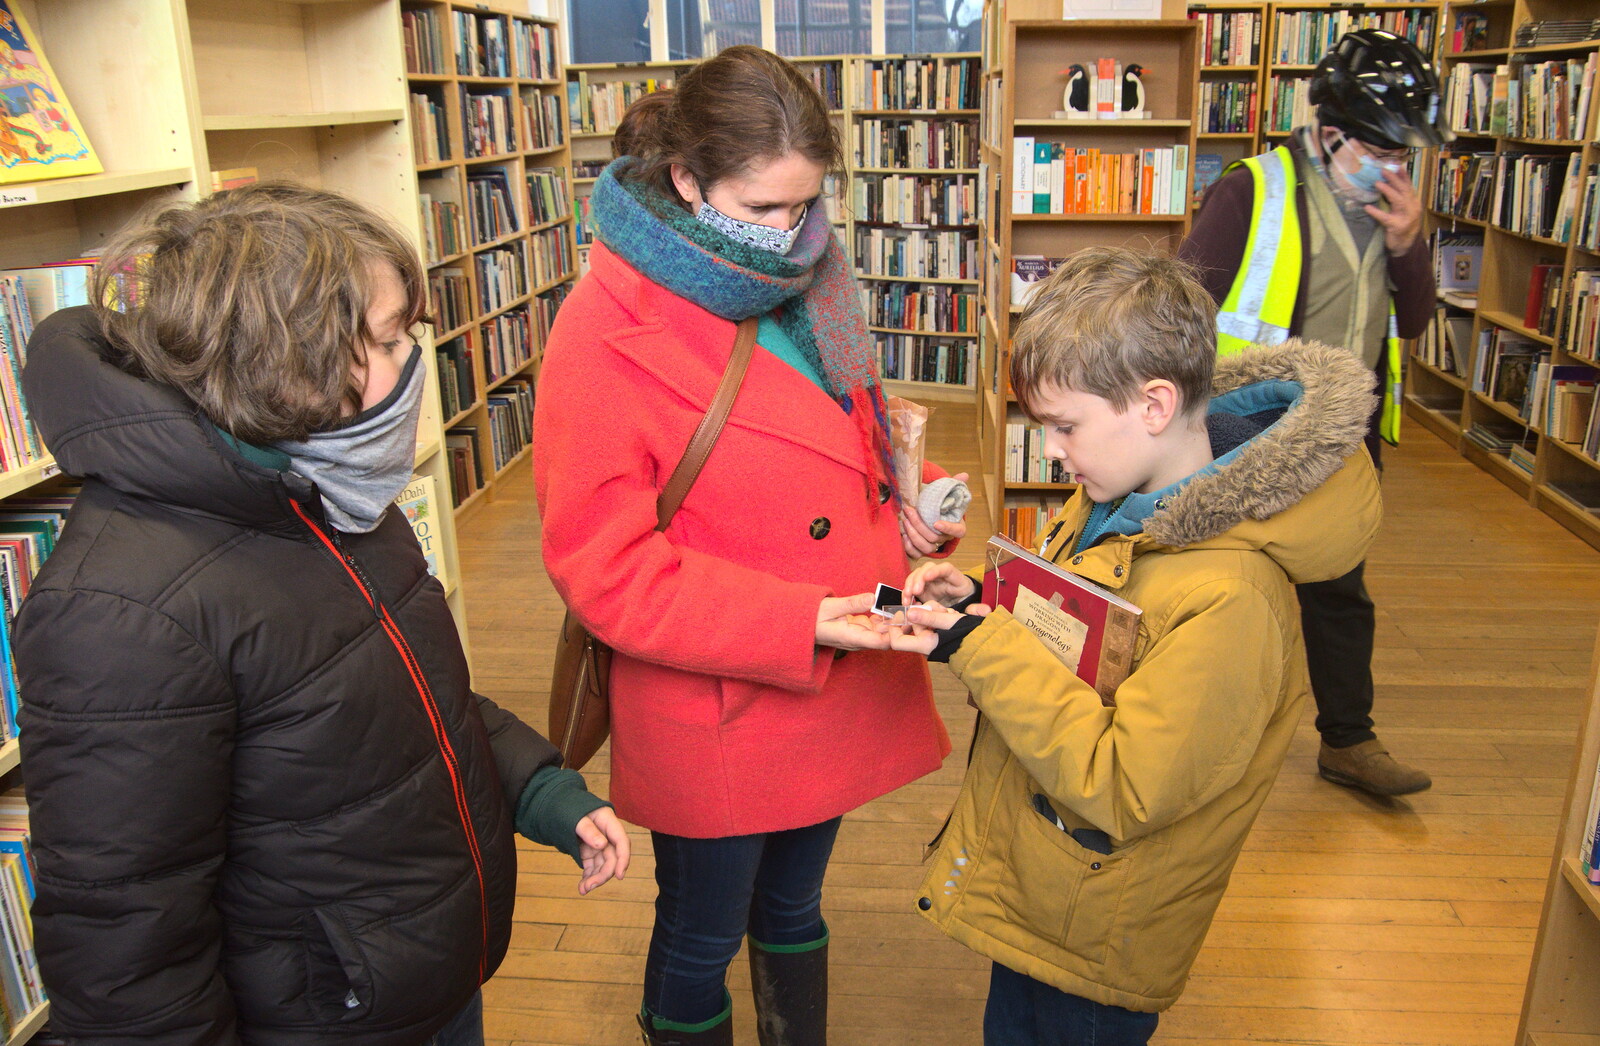 Harry buys a book from A Visit to Blickling Hall, Aylsham, Norfolk - 9th January 2022